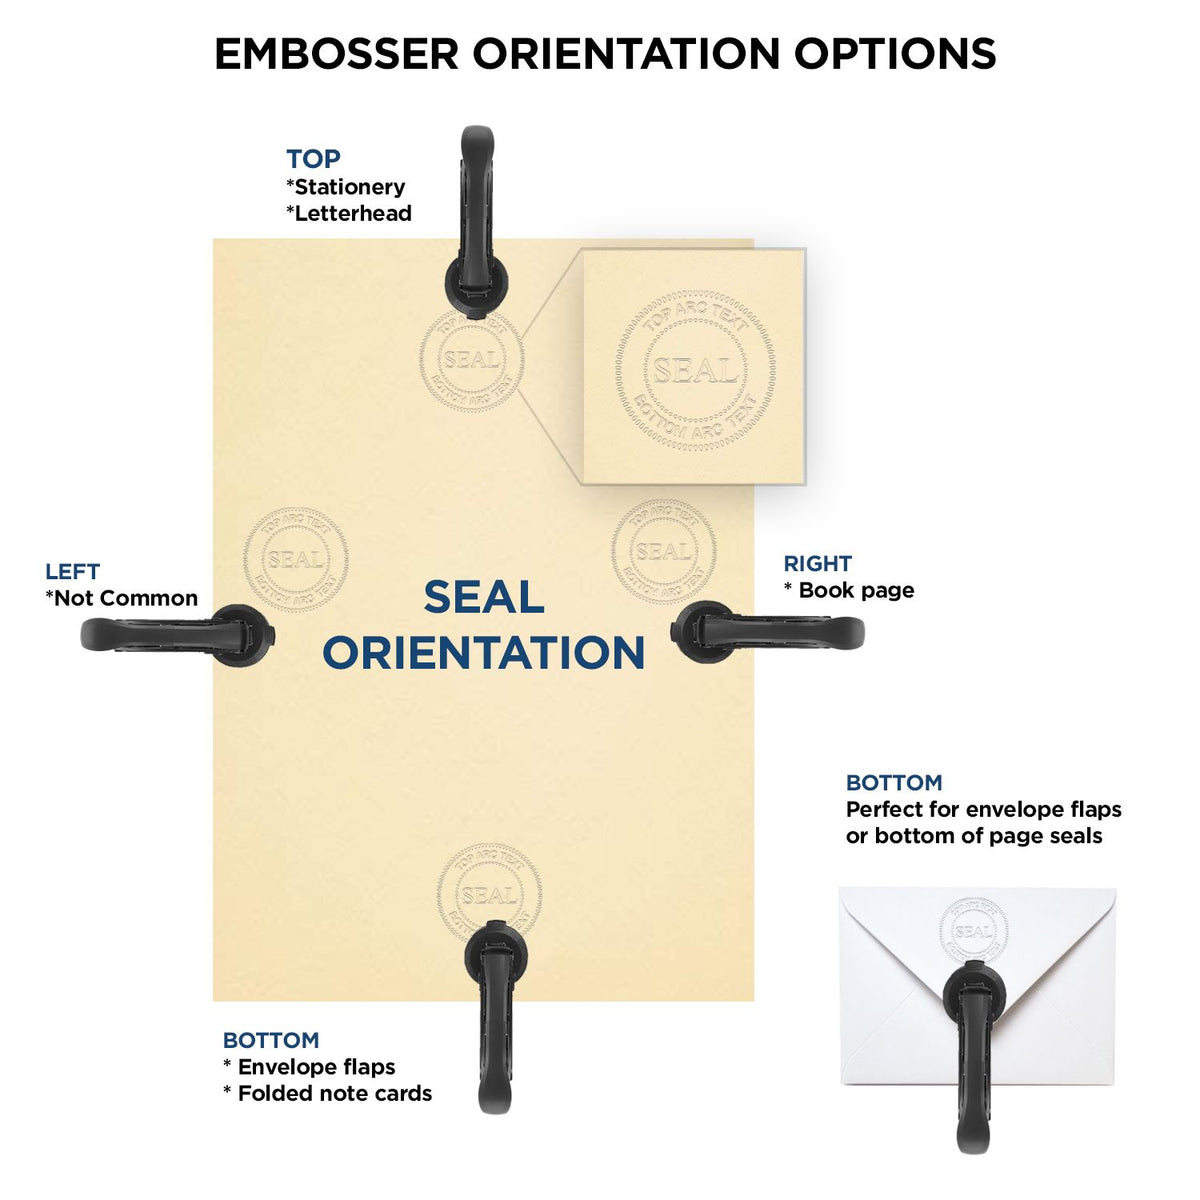 An infographic for the Heavy Duty Cast Iron Washington Engineer Seal Embosser showing embosser orientation, this is showing examples of a top, bottom, right and left insert.